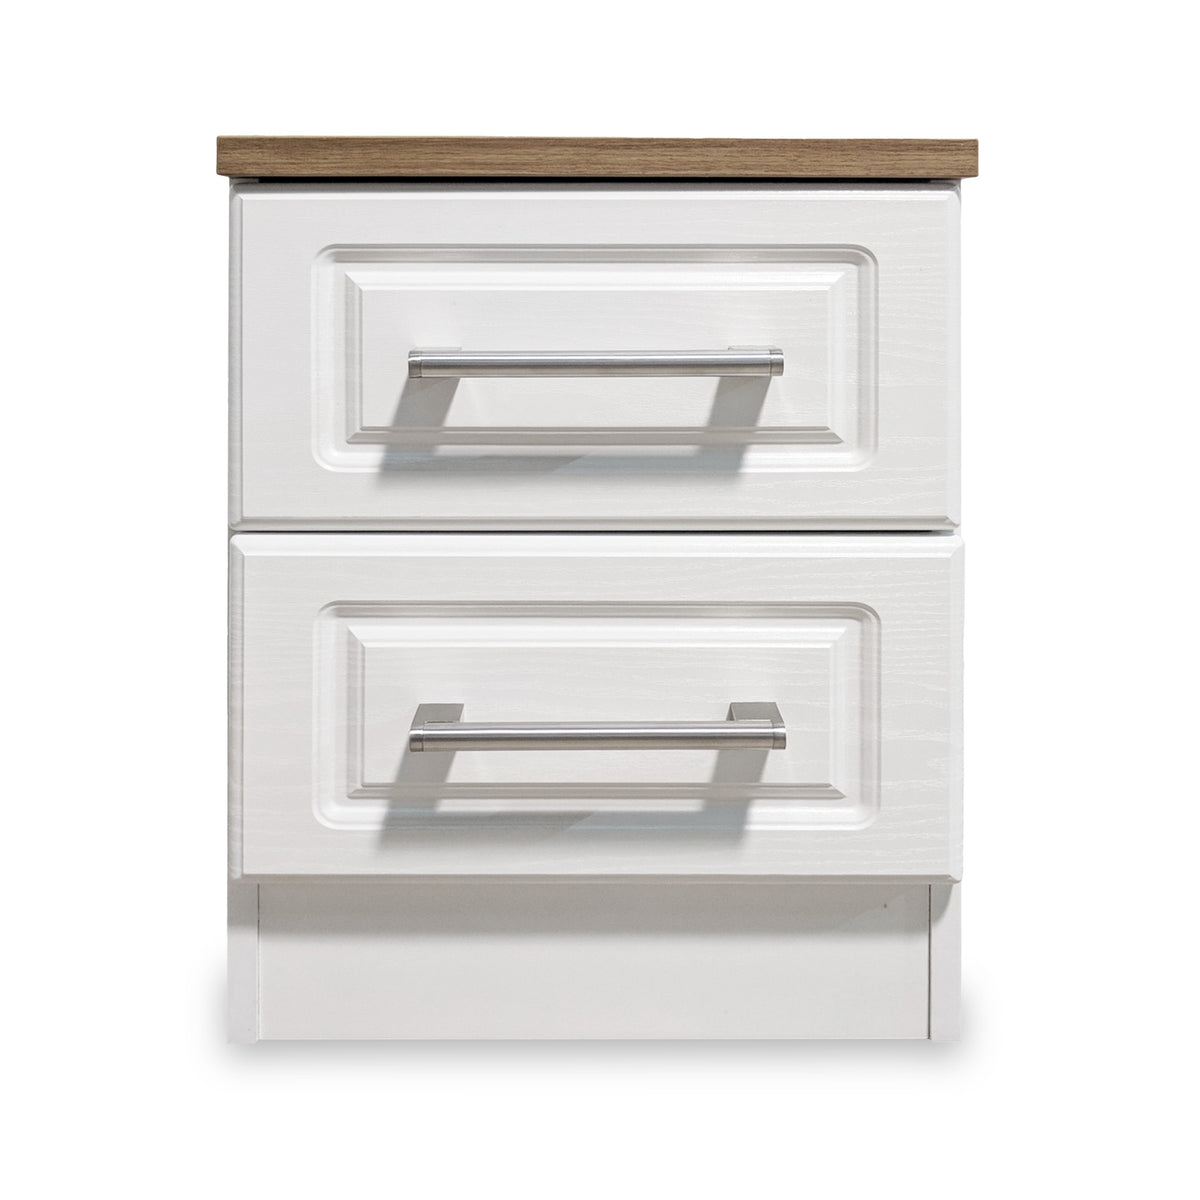 Talland White 2 Drawer Bedside Cabinet by Roseland Furniture